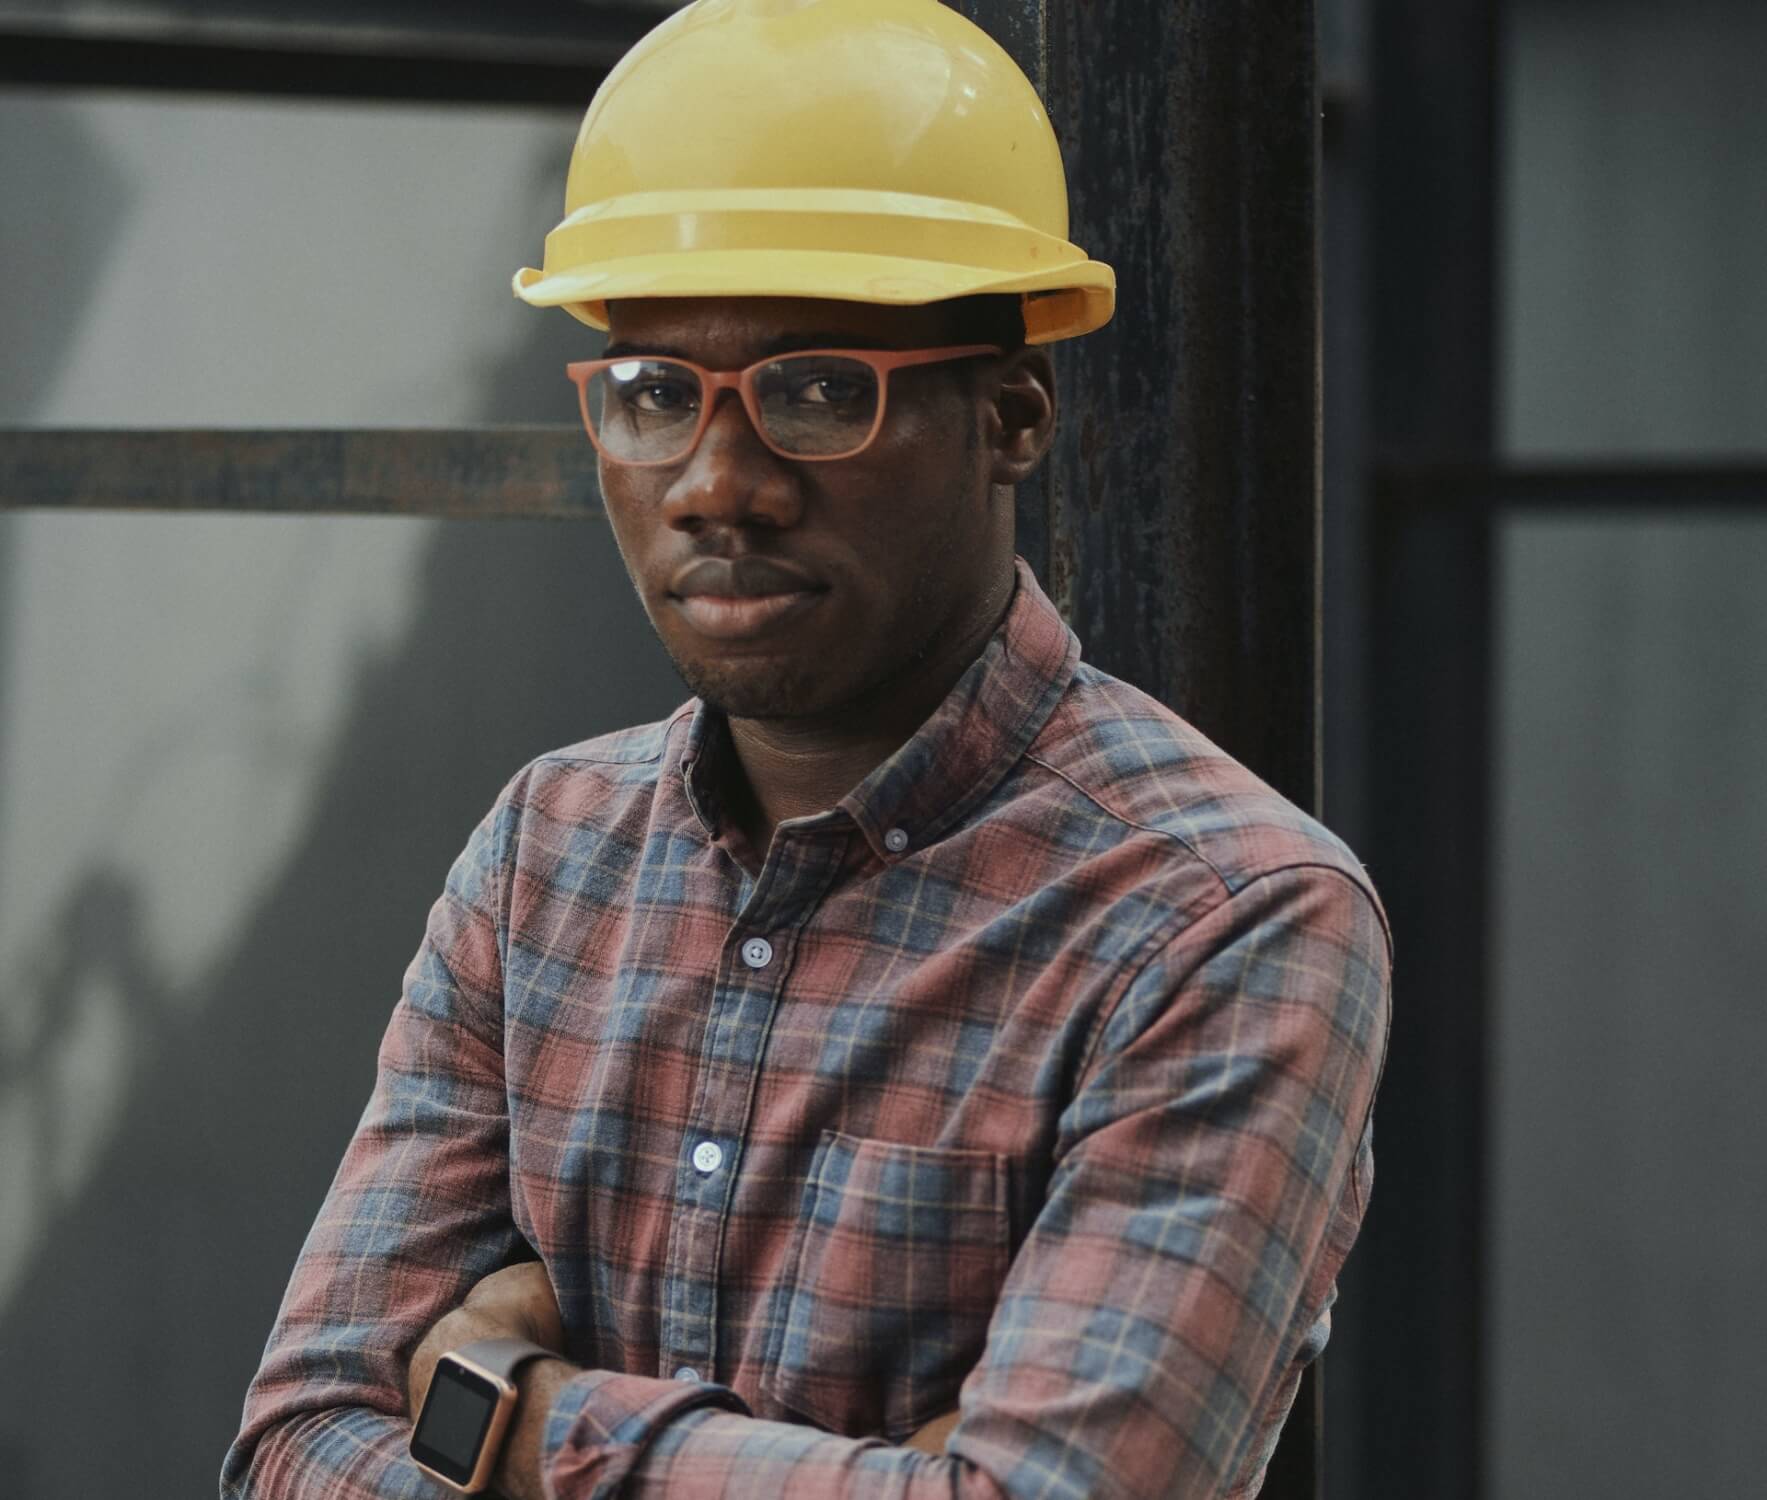 man on construction site wearing construction safety hat